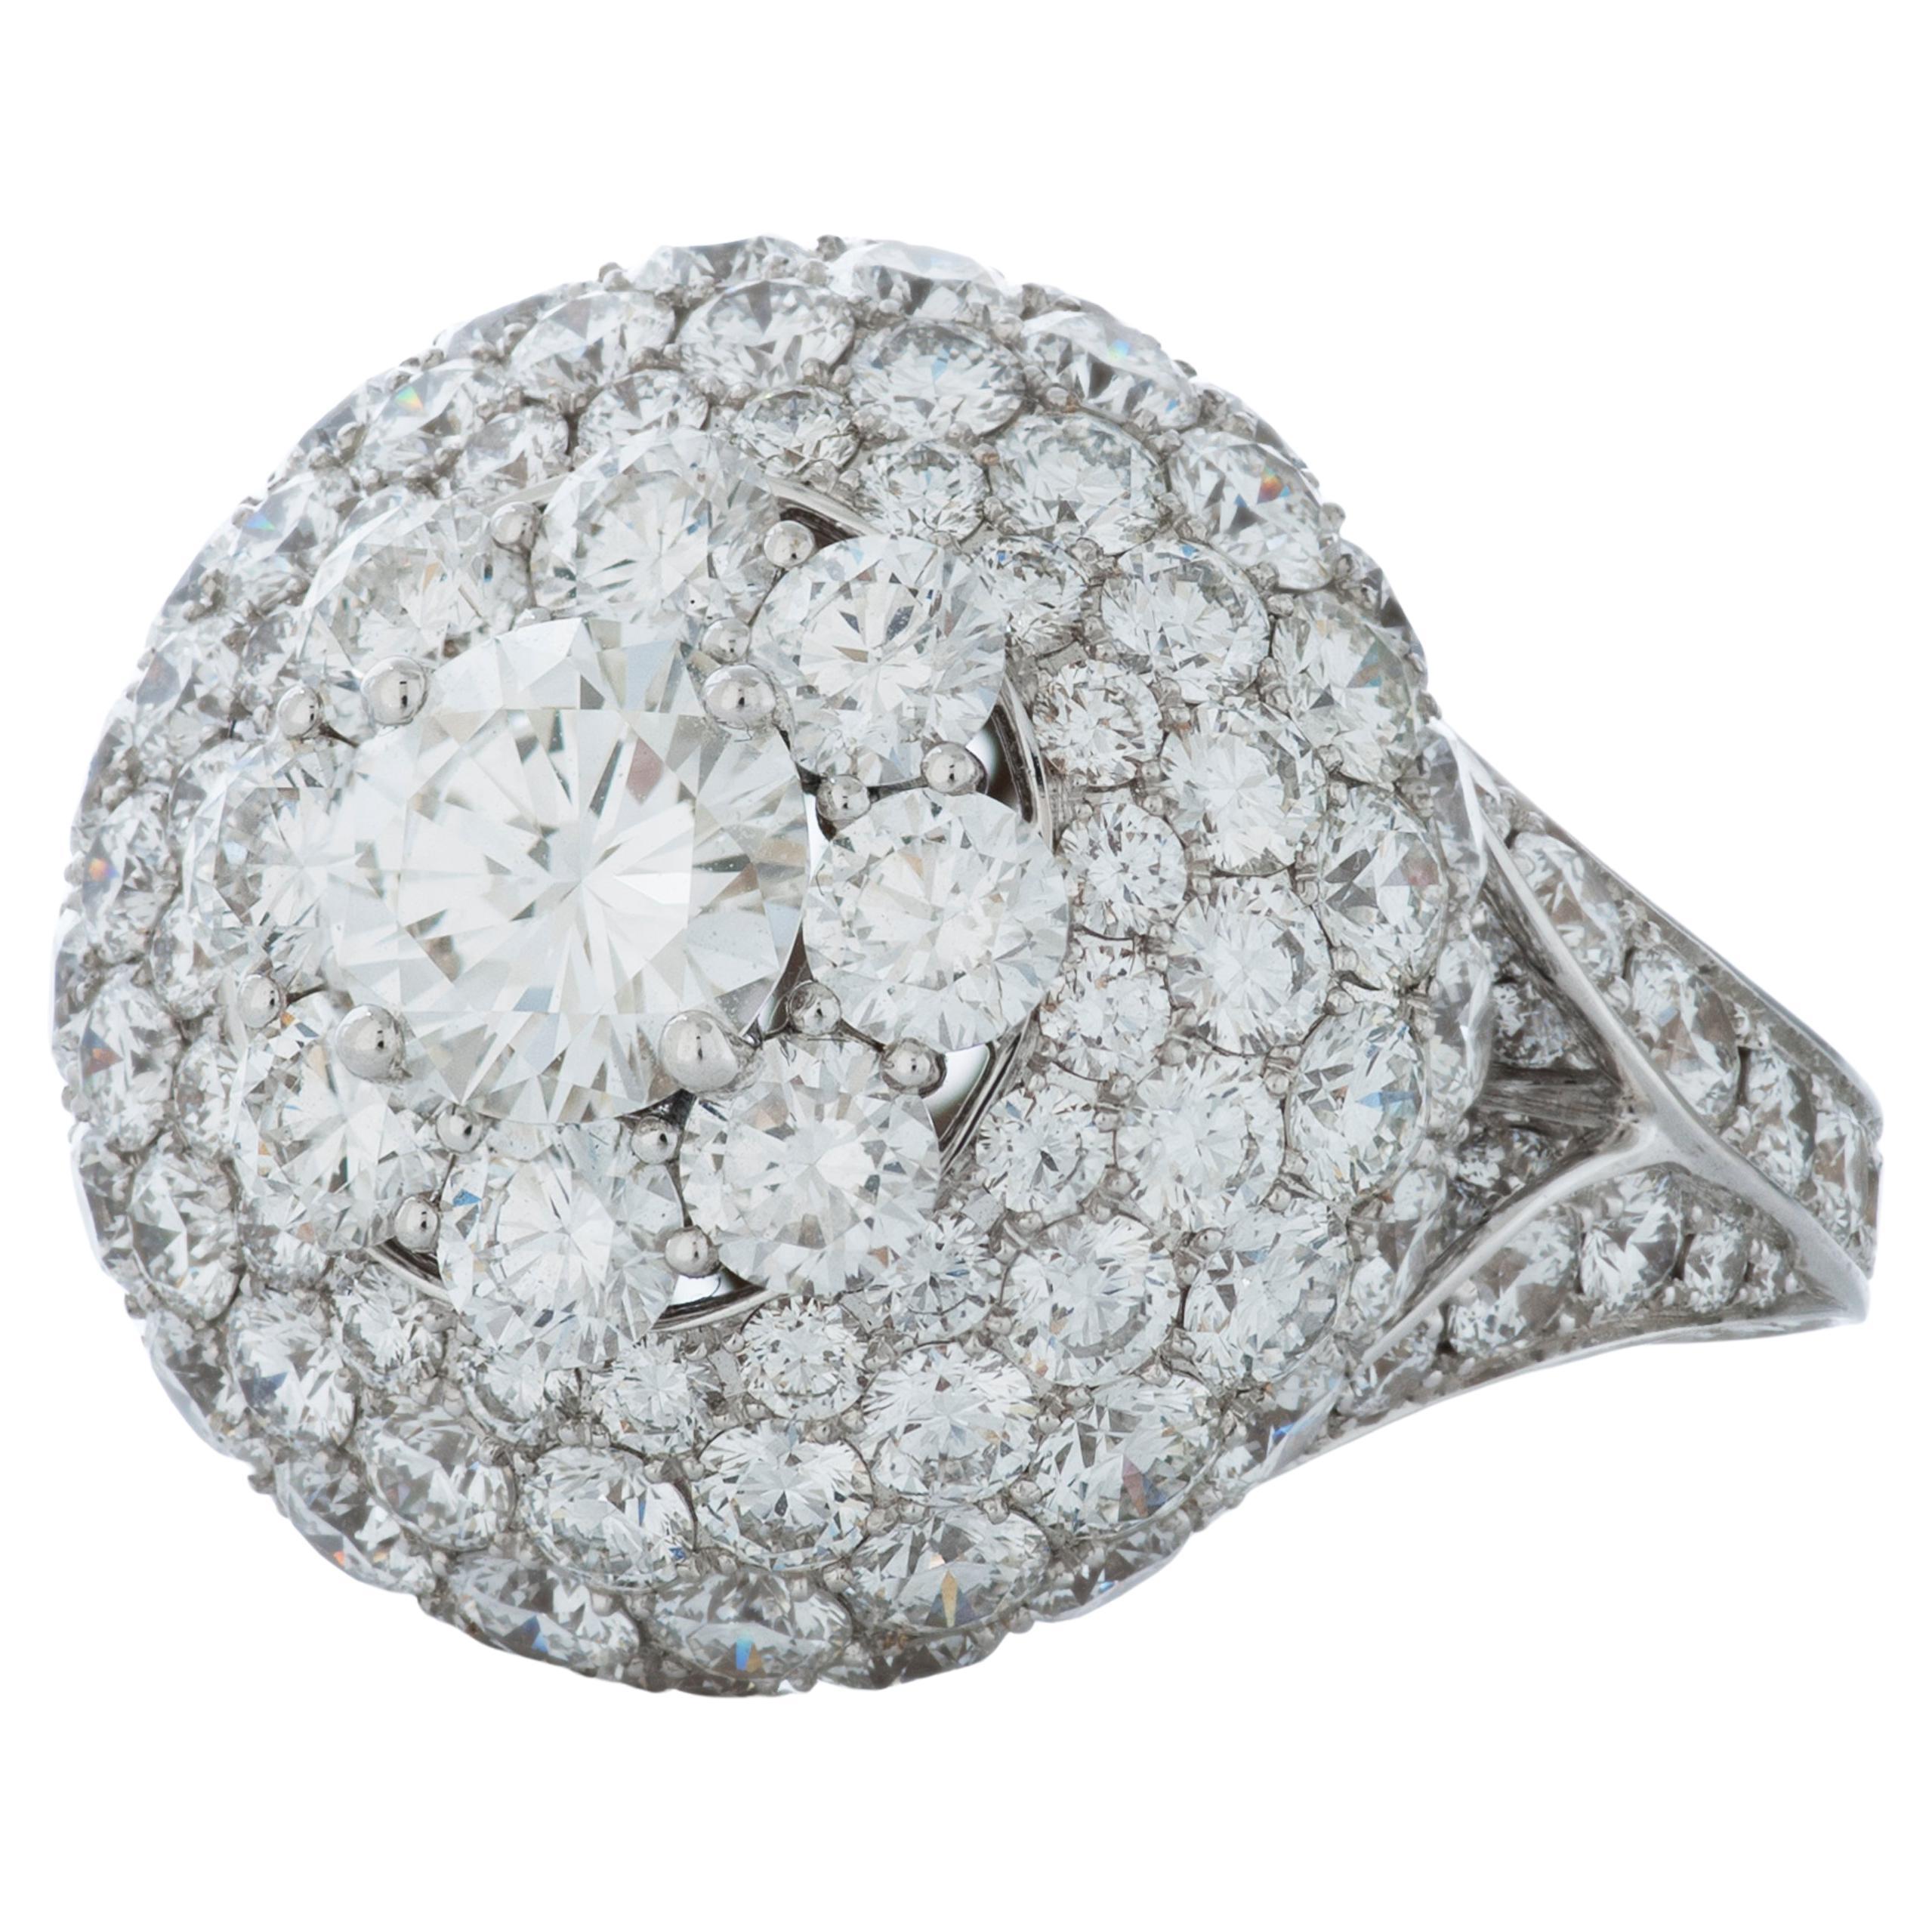 Graff Pave Diamond Bombe Ring in 18kwg with 1.00ct G/VVS2 Round Diamond Center For Sale